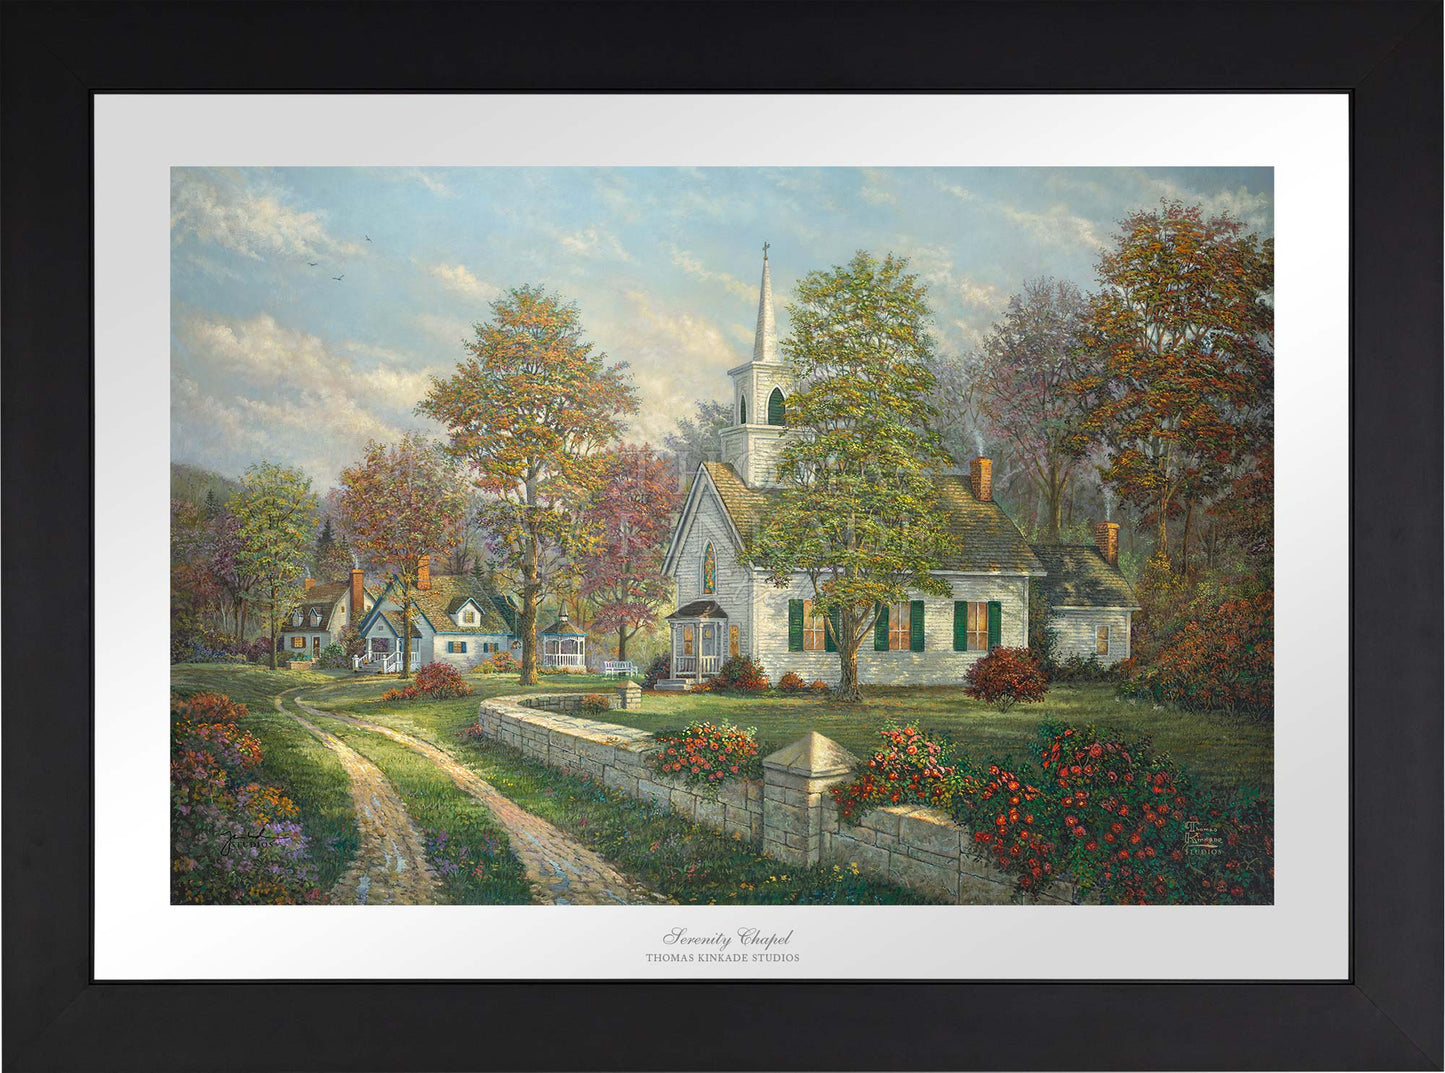 Serenity Chapel - Limited Edition Paper